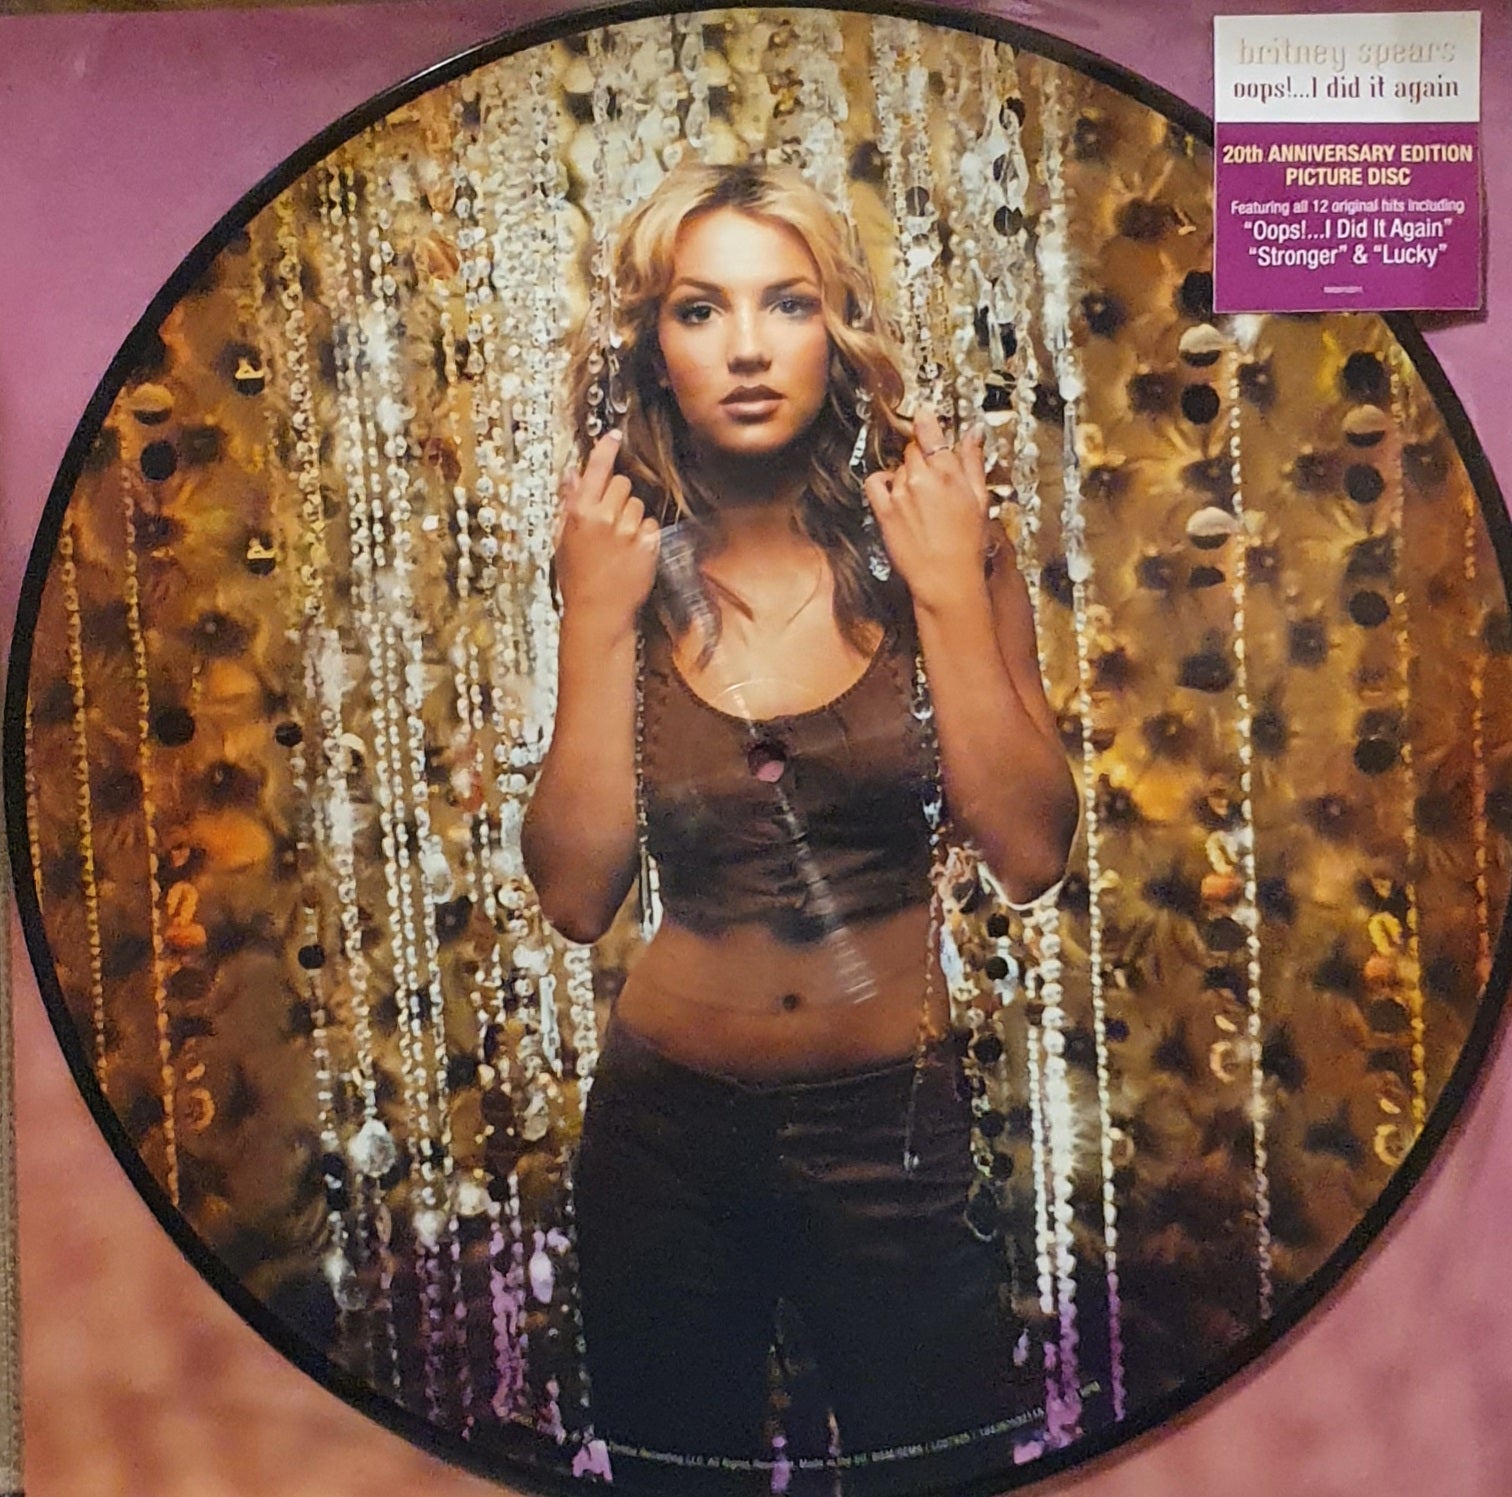 Britney Spears – Oops!...I Did It Again LP LTD Picture Disc